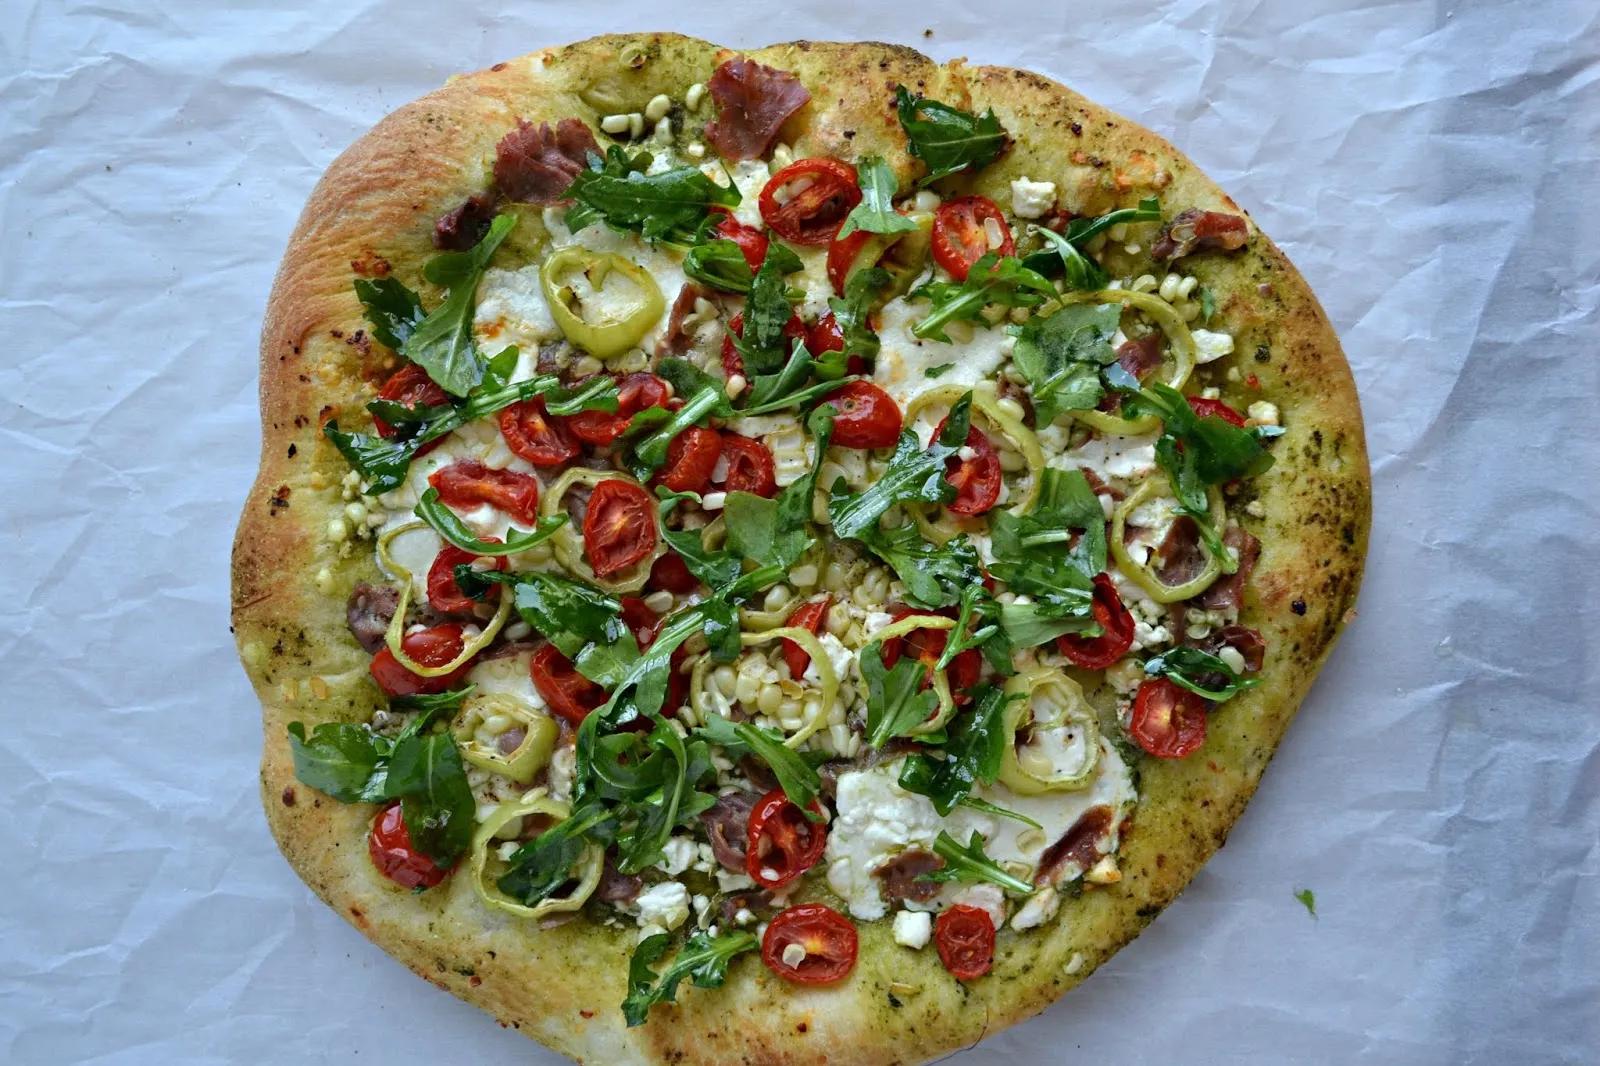 Backyard Patch Herbal Blog: Grilled Pizza with Pesto &amp; Feta - Weekend ...